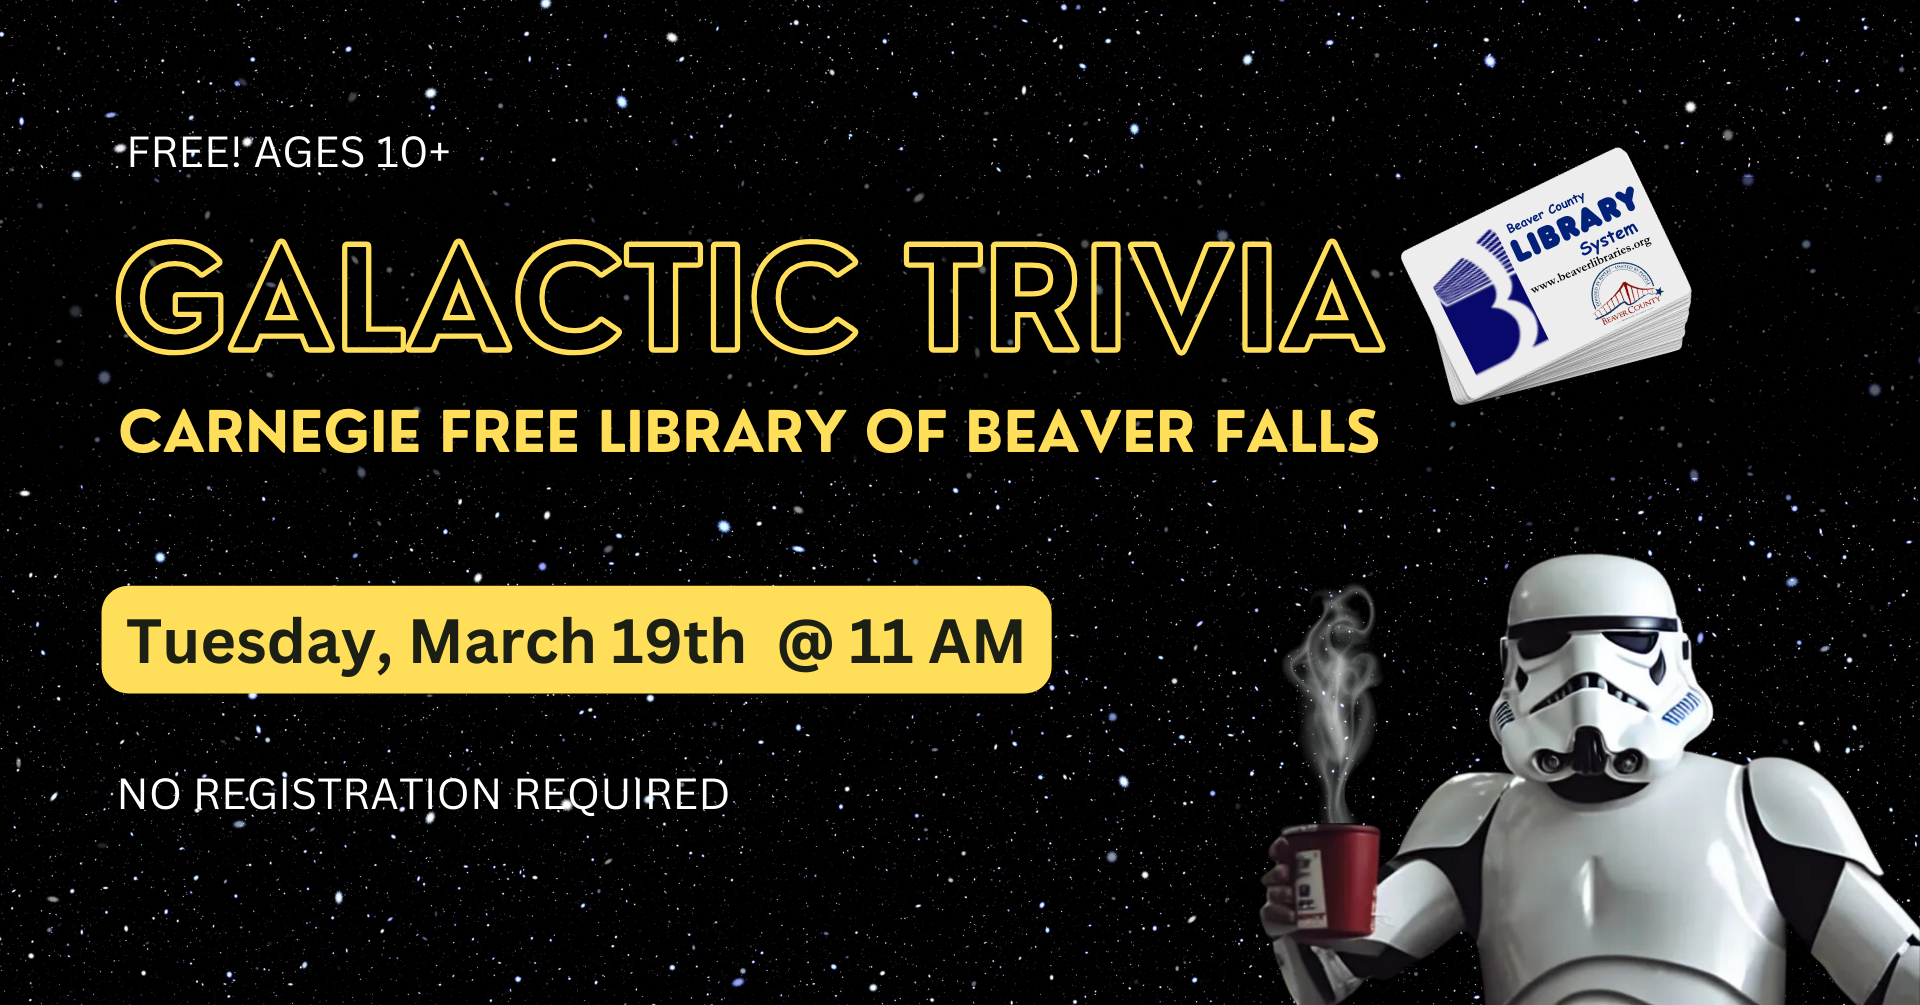 Galactic Day Trivia with The Carnegie Library of Beaver Falls